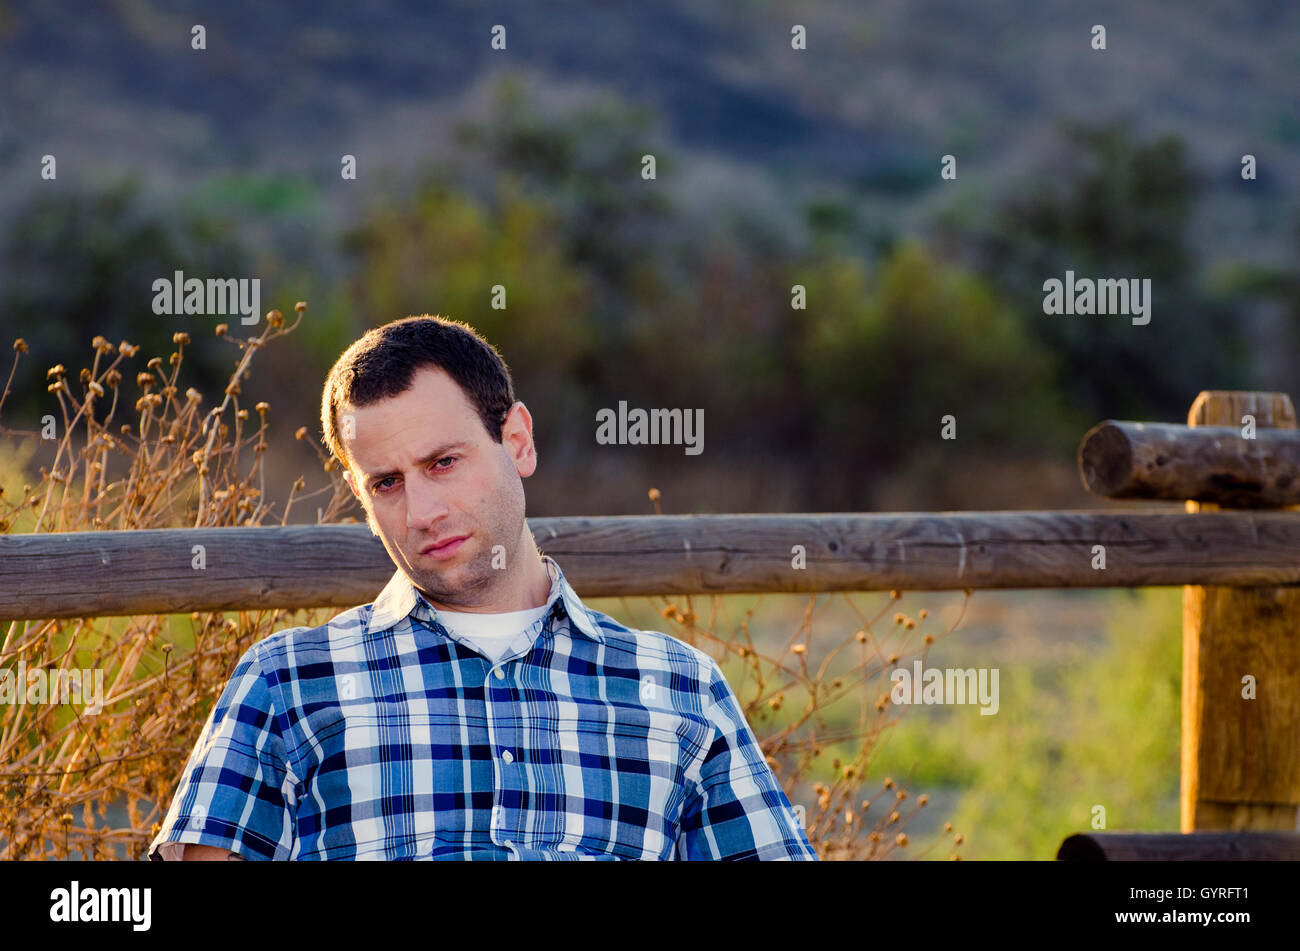 Man with a bored, indifferent expression slouching sitting in a field. Stock Photo